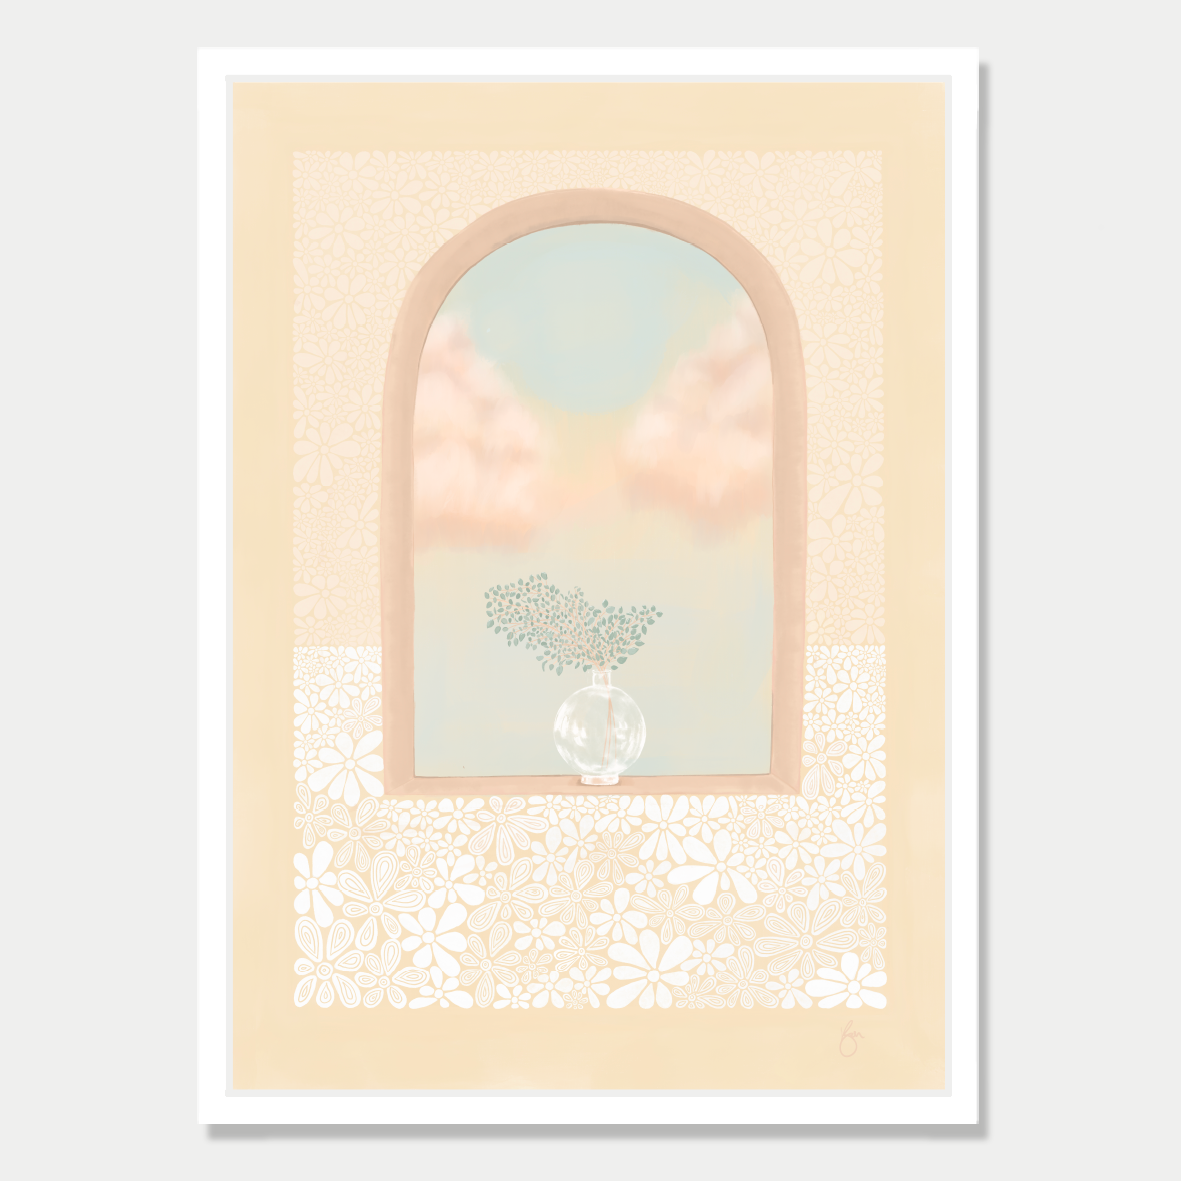 Art print of an arched window with a plant sitting in it and a view of fluffy clouds, in a pastel yellow and peach colour palette, by Bon Jung. Printed in New Zealand by endemicworld and framed in white.